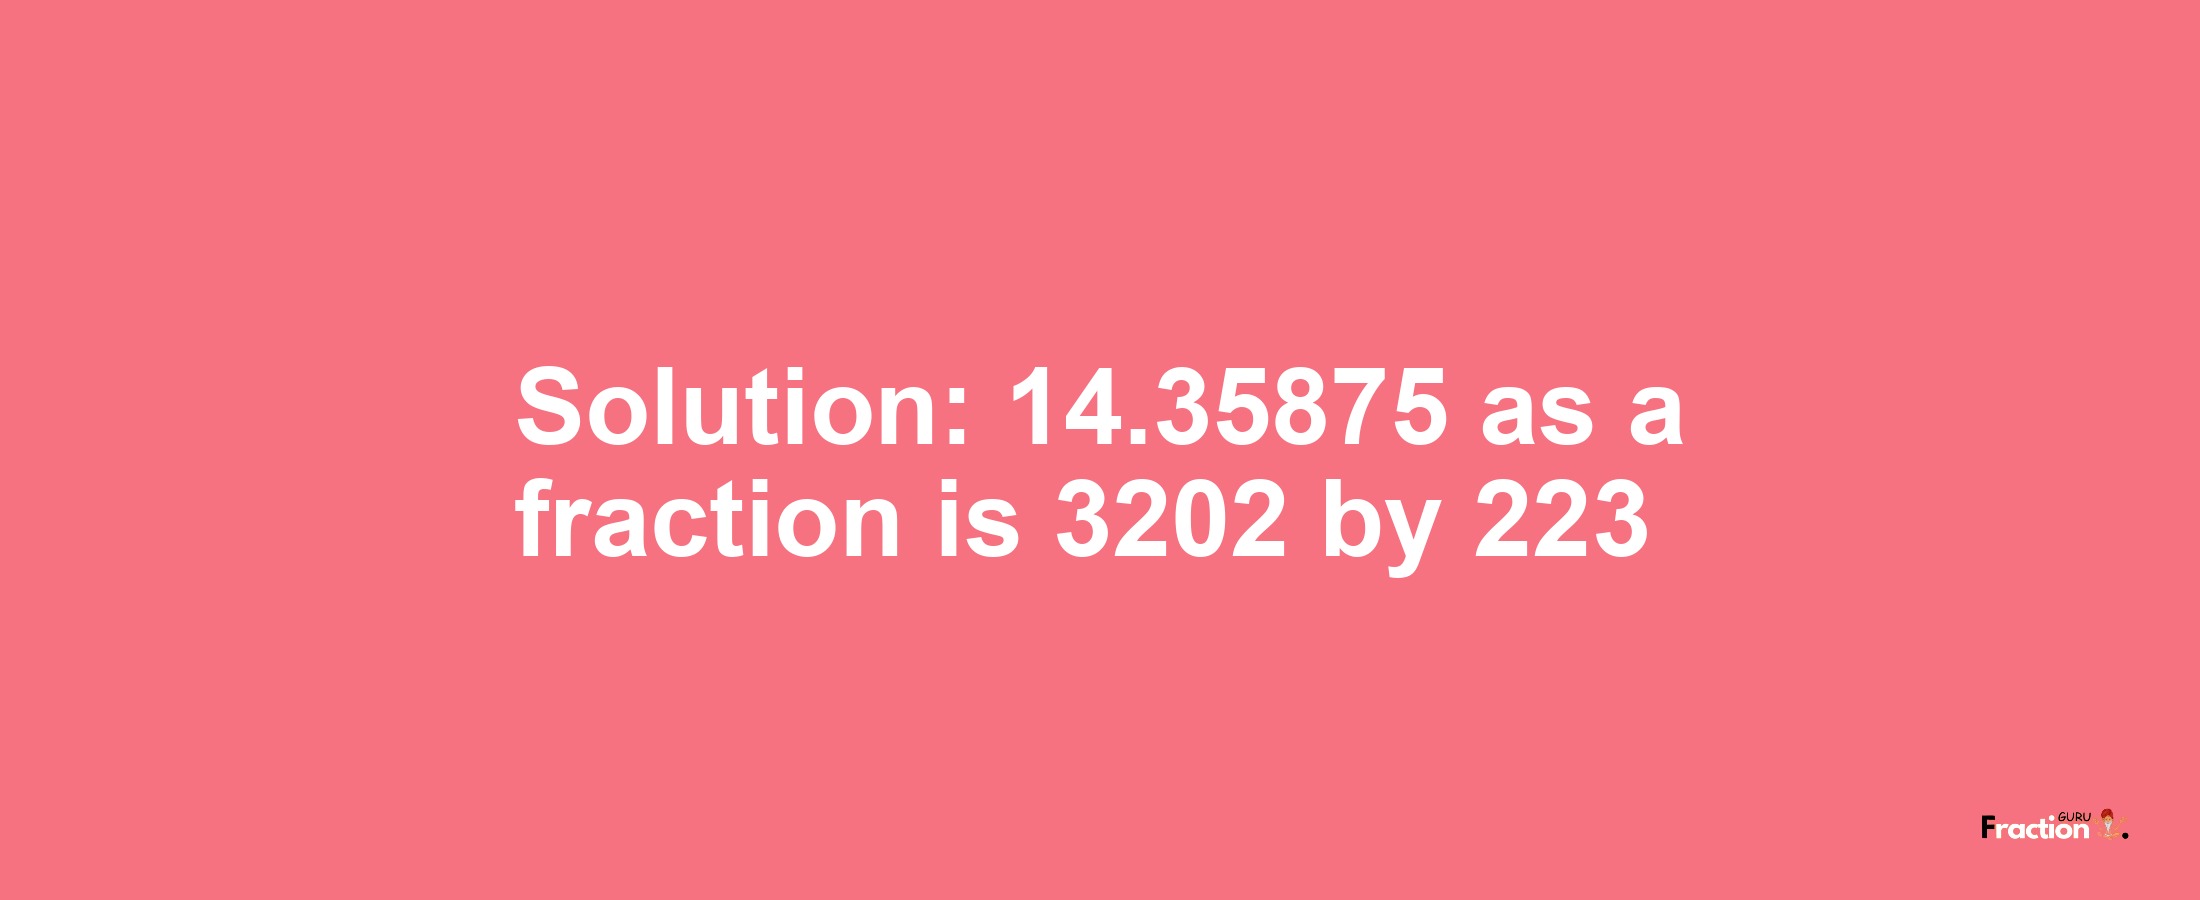 Solution:14.35875 as a fraction is 3202/223